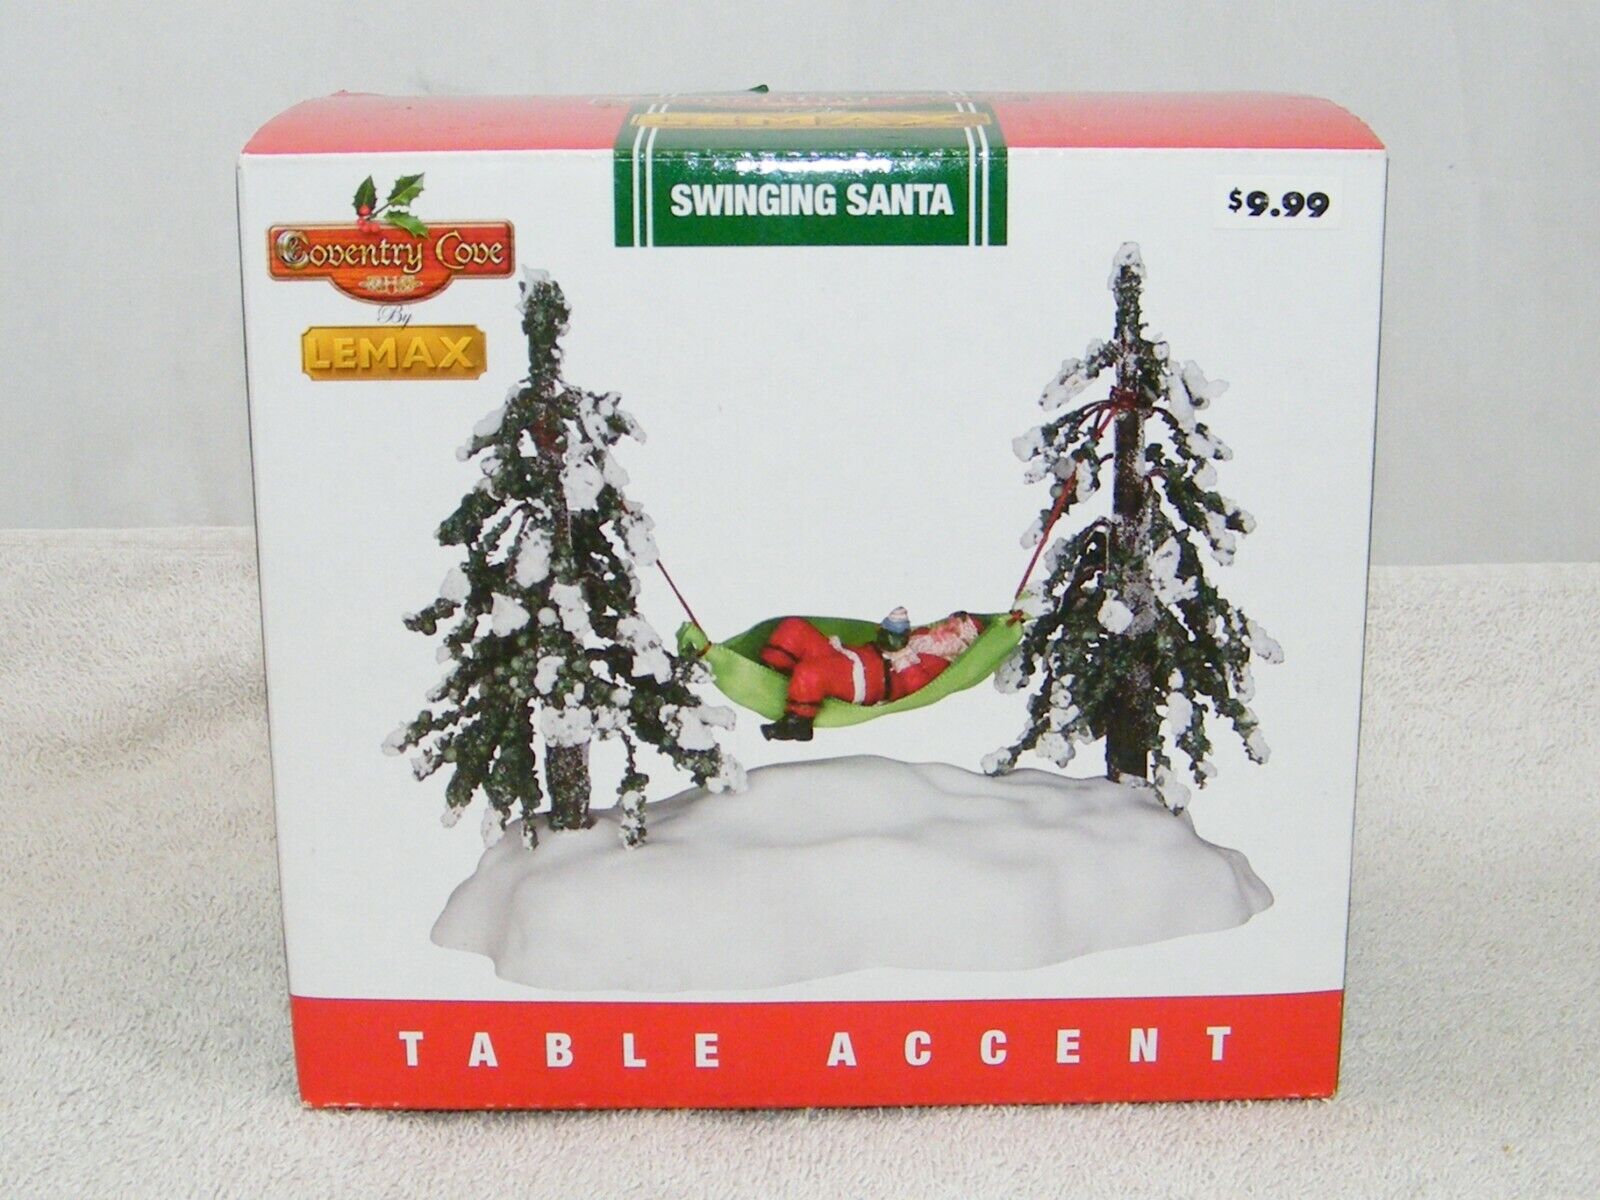 NEW 2004 LEMAX COVENTRY COVE SWINGING SANTA TABLE ACCENT